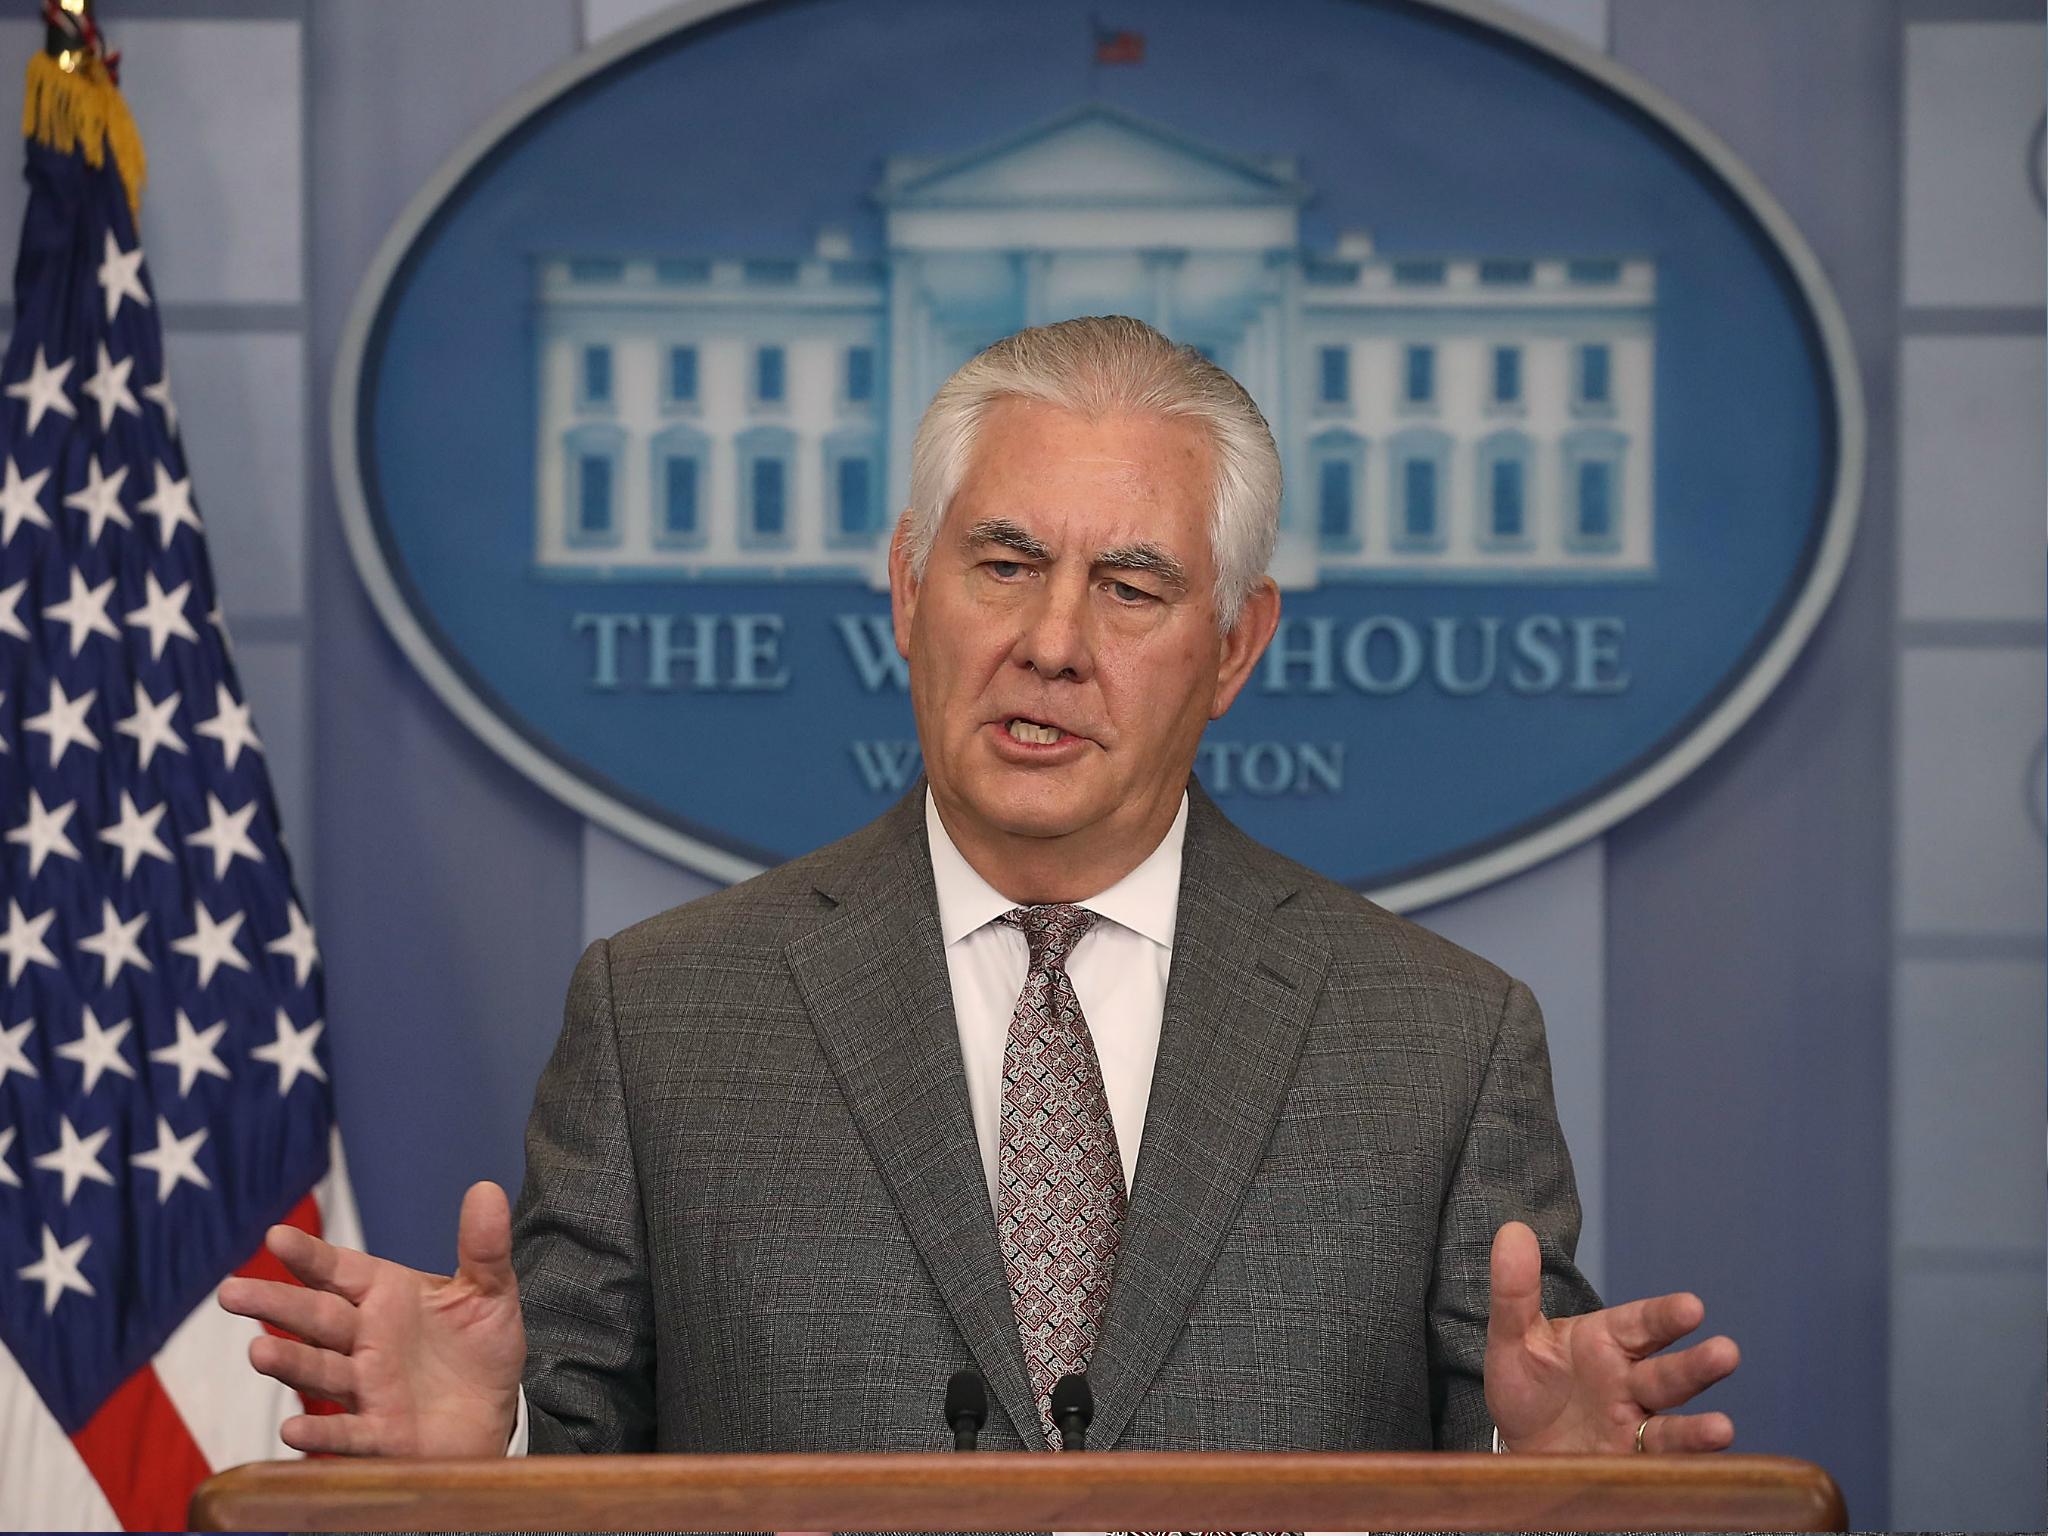 US Secretary of State Rex Tillerson's own staff issued a 'dissent memo' regarding his decision about countries that recruit and use child soldiers